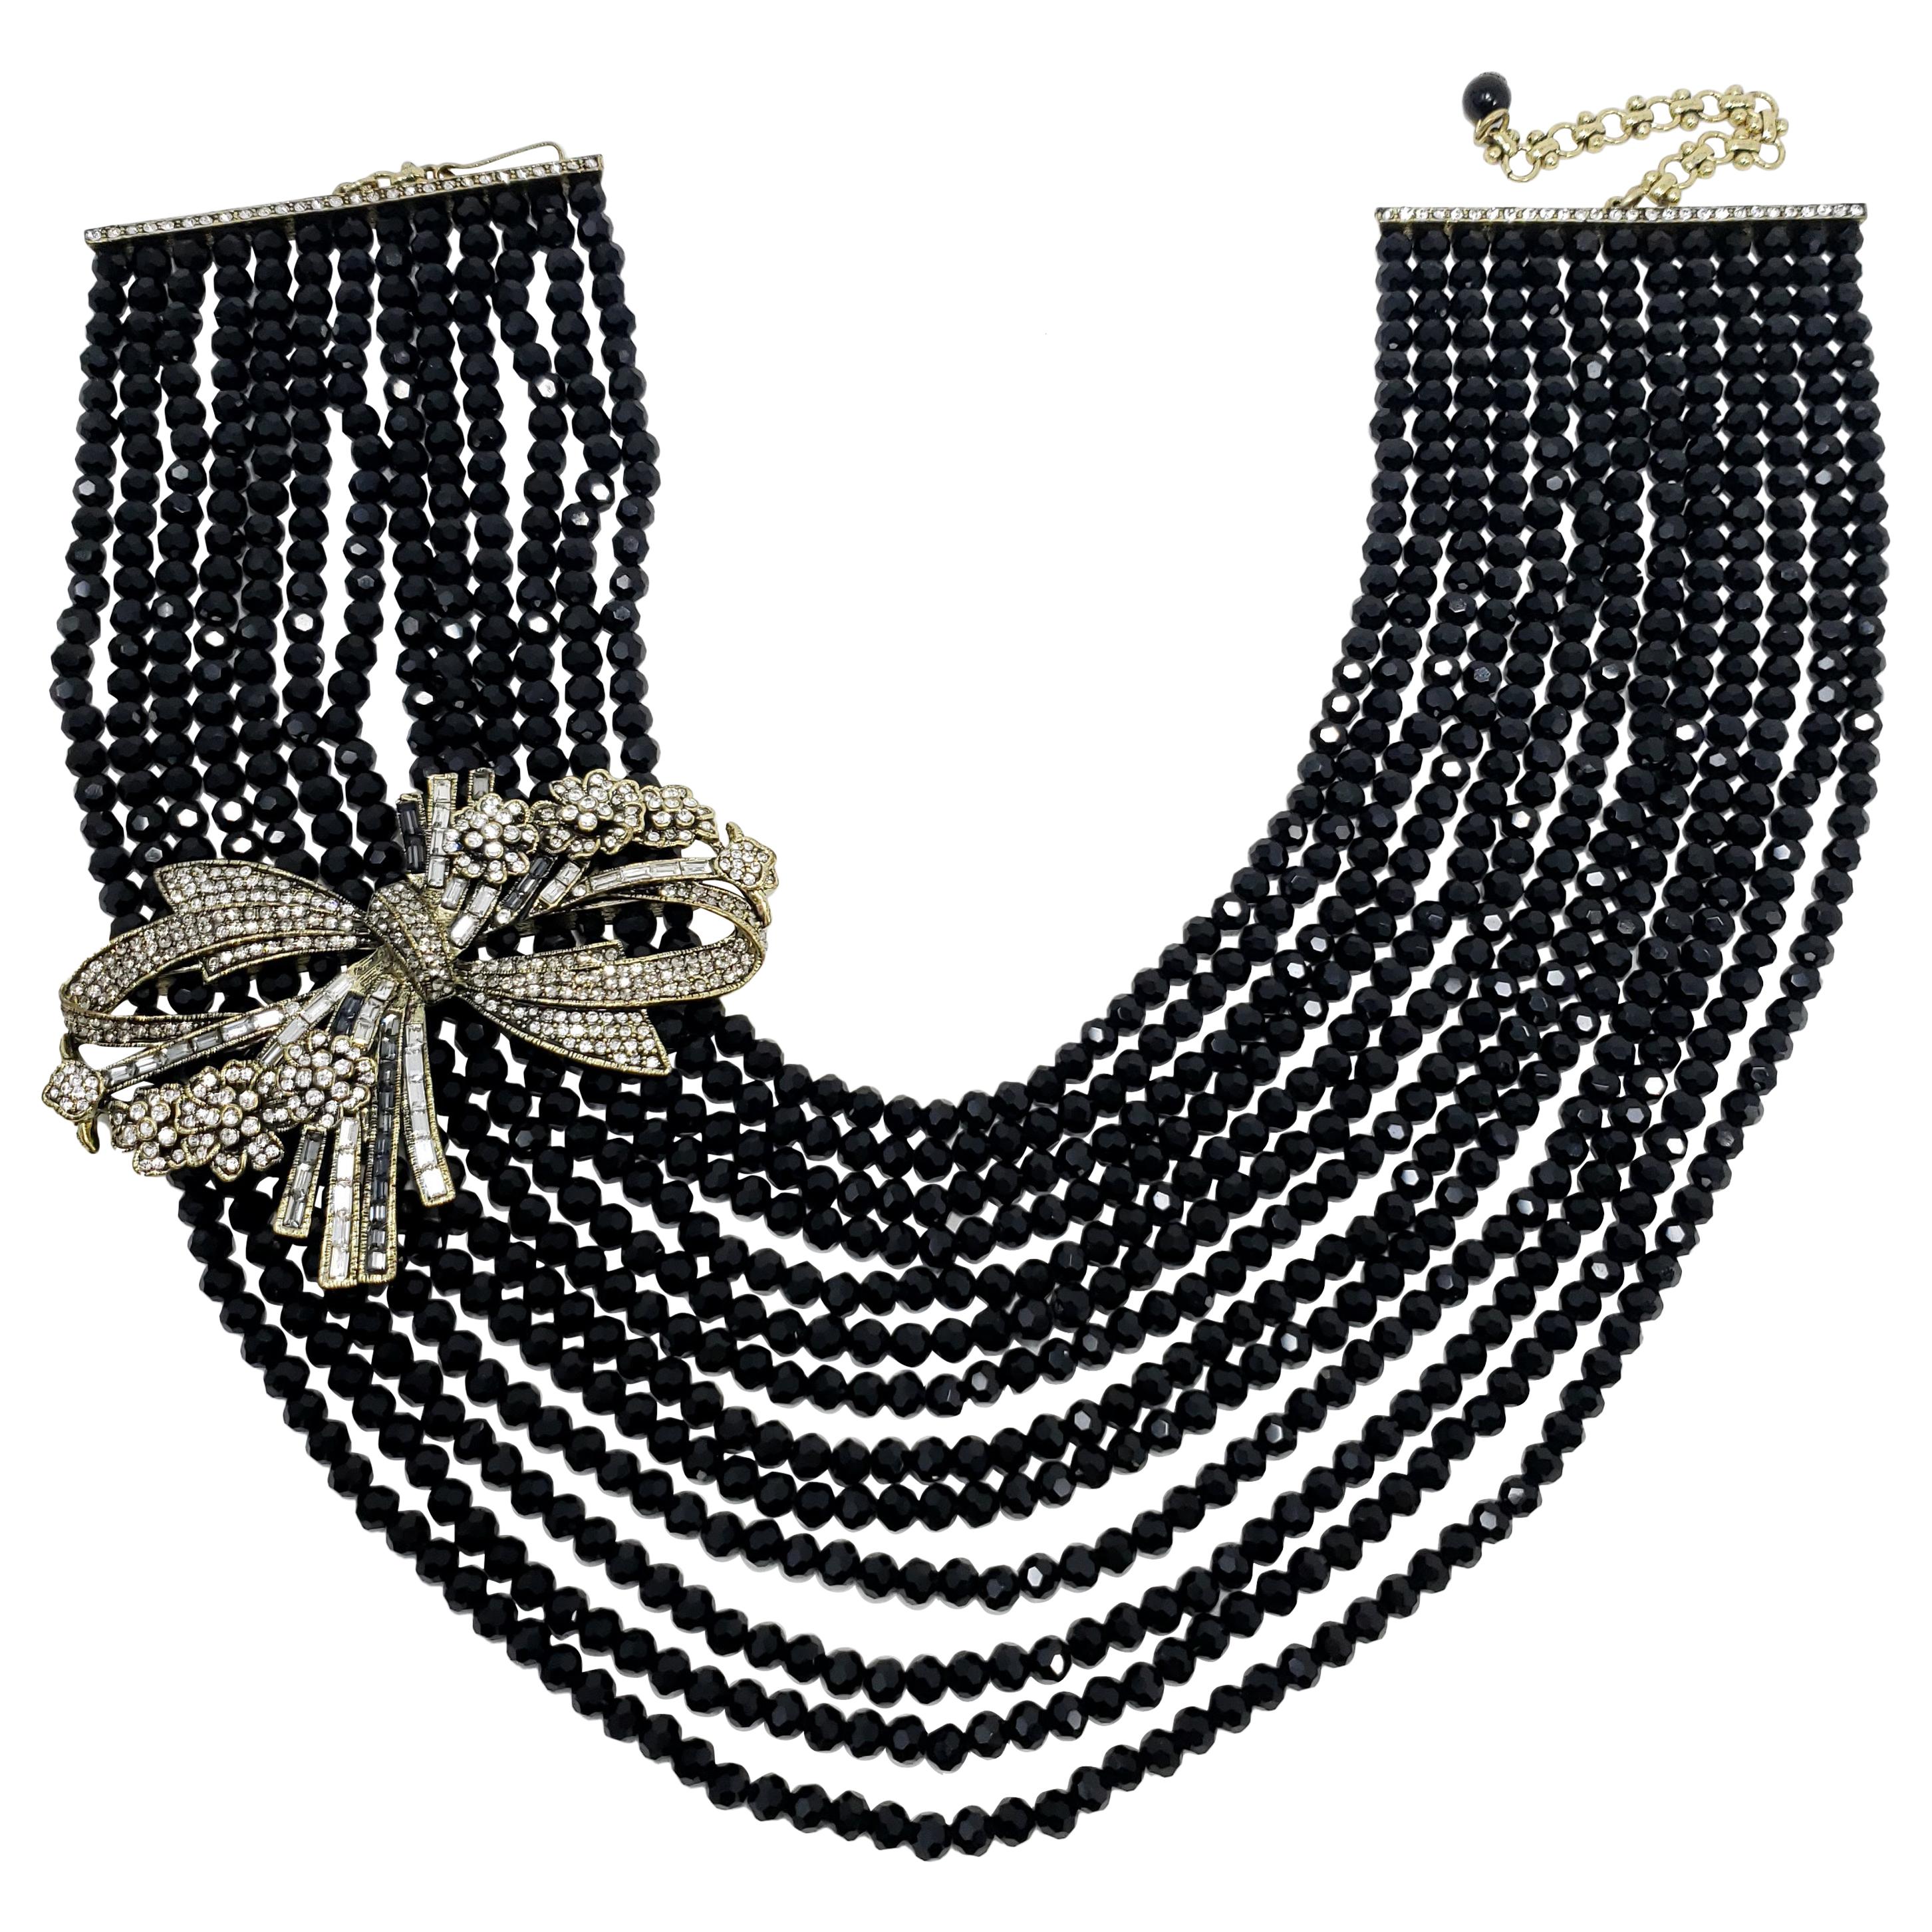 BLACK TONE CHAIN  NECKLACE WITH DROP RHINESTONE BOW DESIGN NECKLACE 